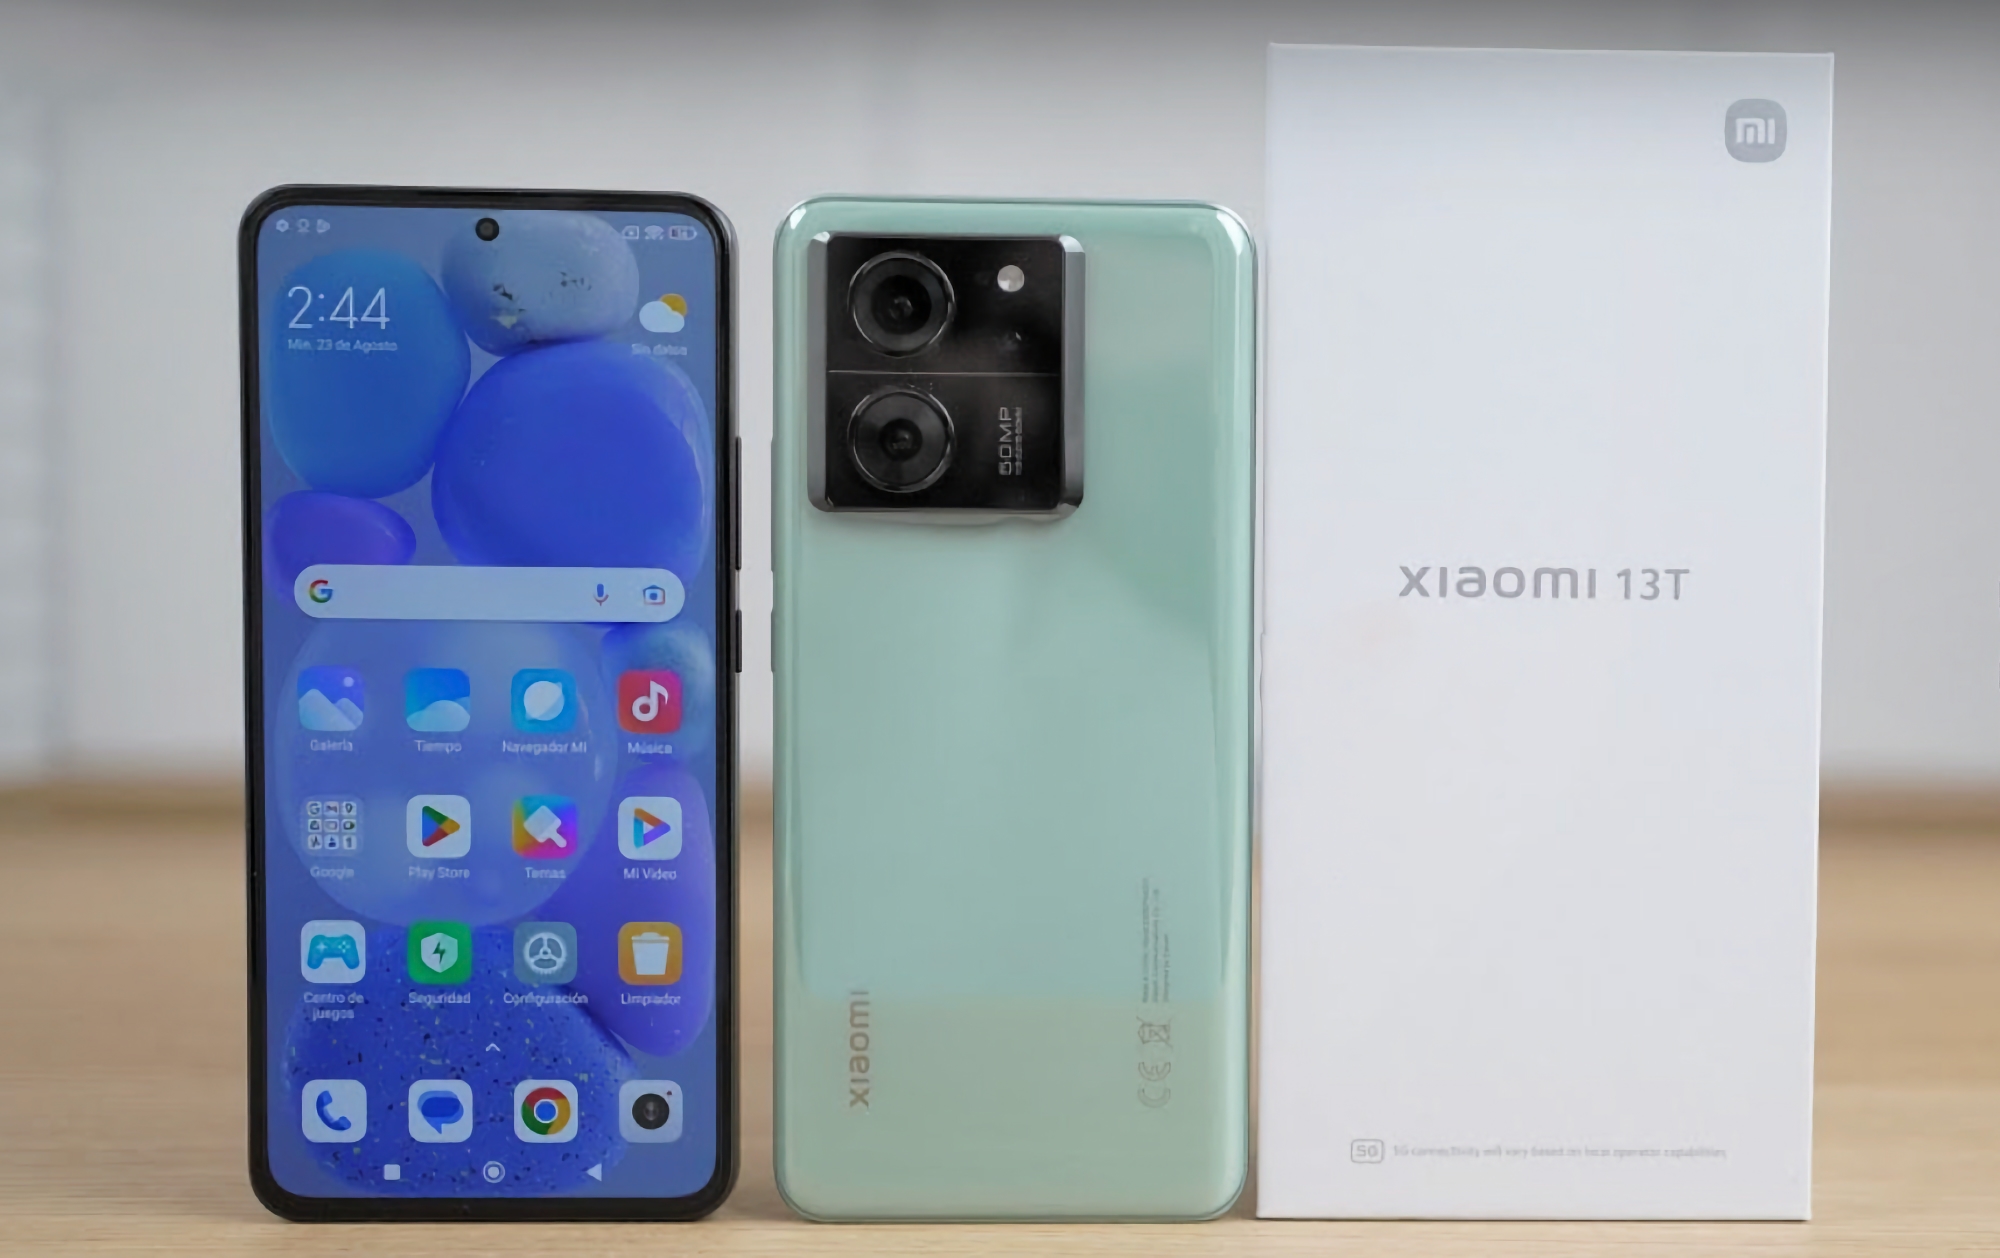 An unboxing video of the yet-to-be-announced Xiaomi 13T smartphone has surfaced on YouTube